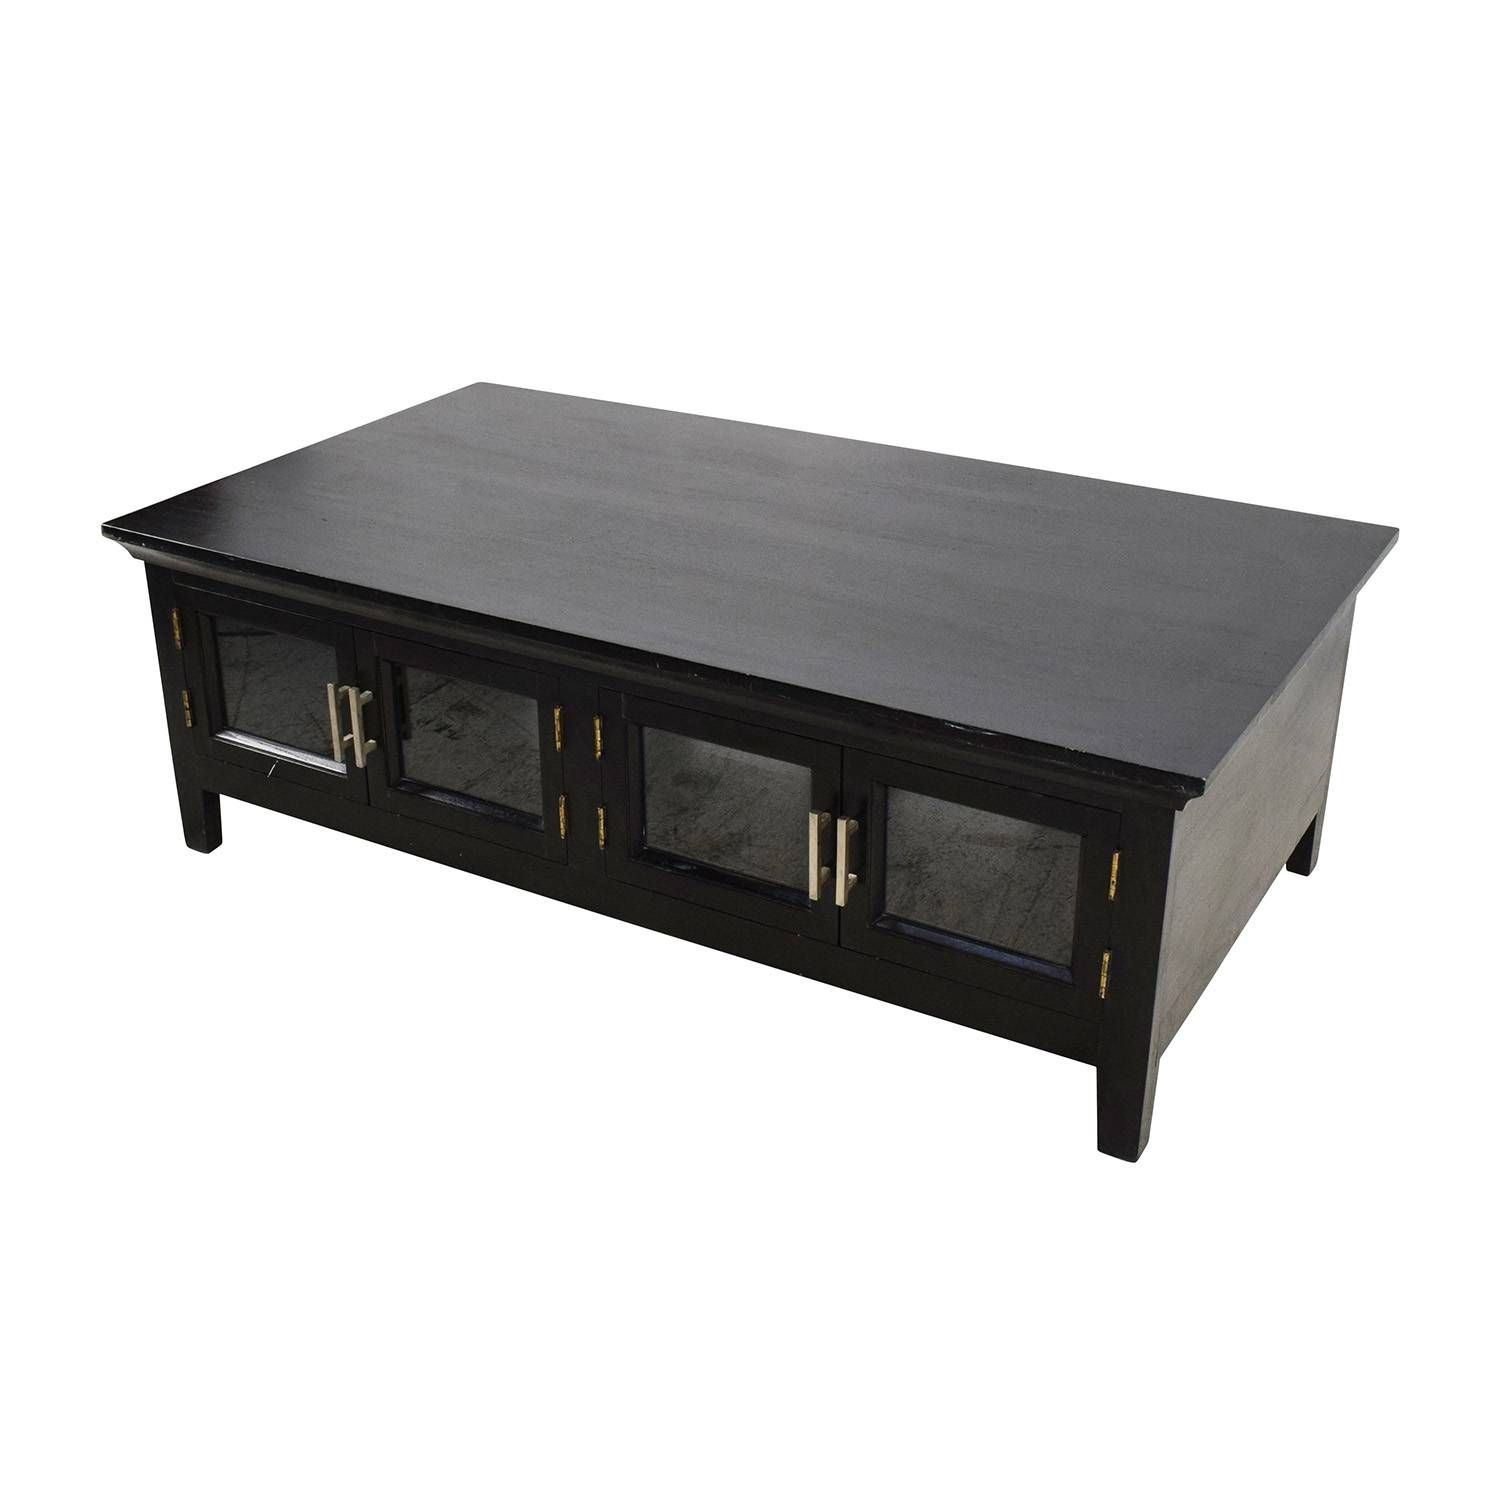 64% Off – Black Wooden Storage Coffee Table / Tables Within Wooden Storage Coffee Tables (View 29 of 30)